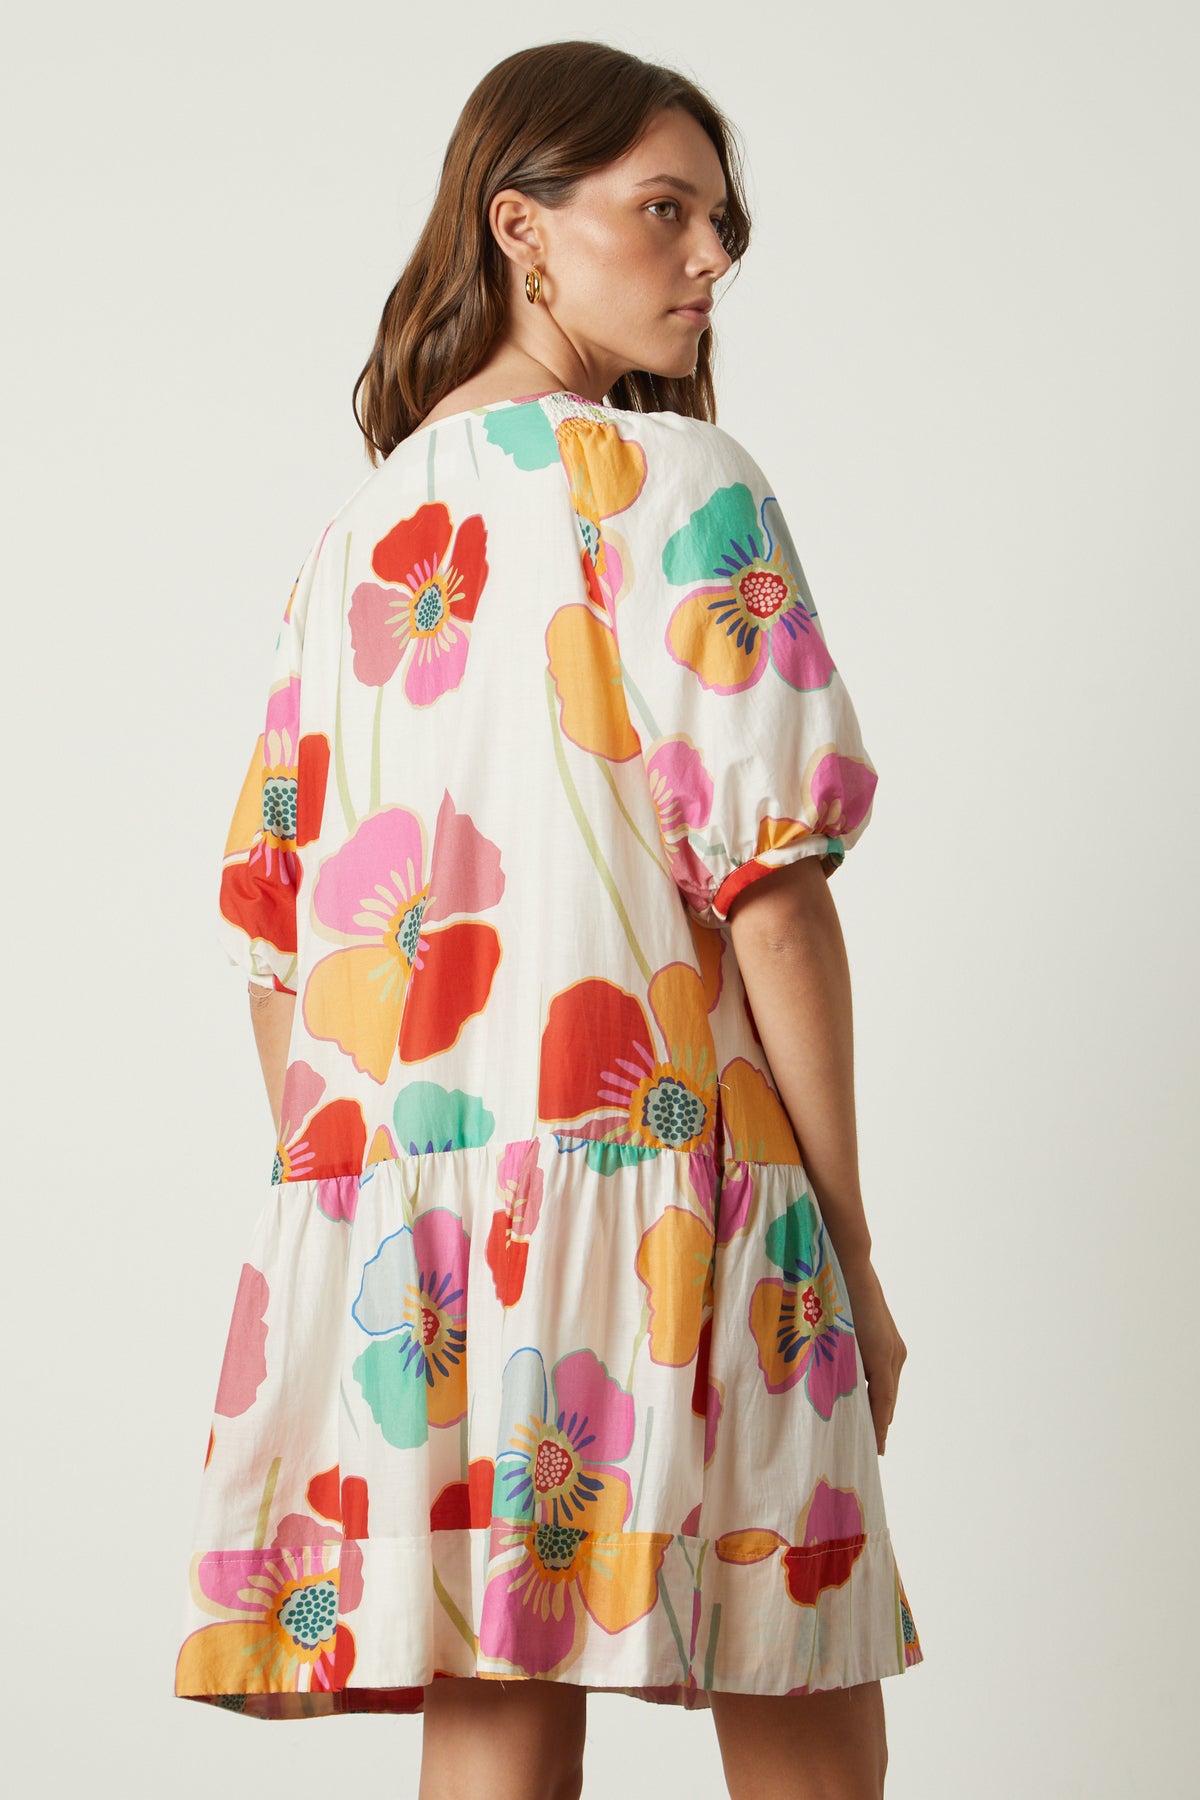   Rachel Dress in bold floral print on cream background back 